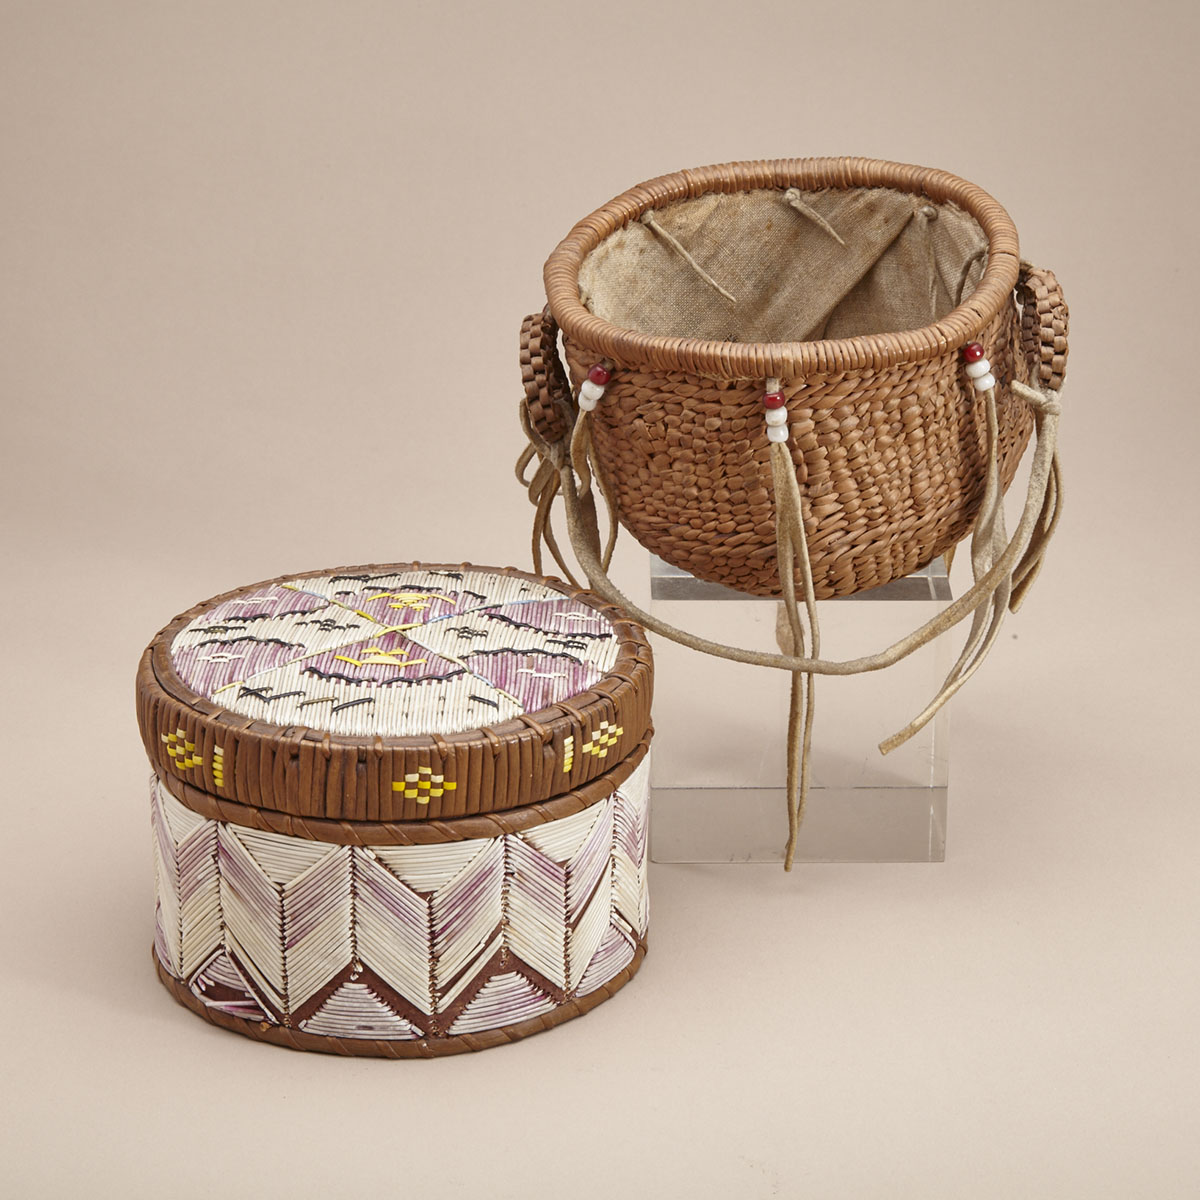 FABRIC LINED BASKET WITH HANDLES AND A SKIN STRAP, DECORATED WITH TASSELS WITH RED AND WHITE BEADS; MI'KMAQ QUILL BASKET